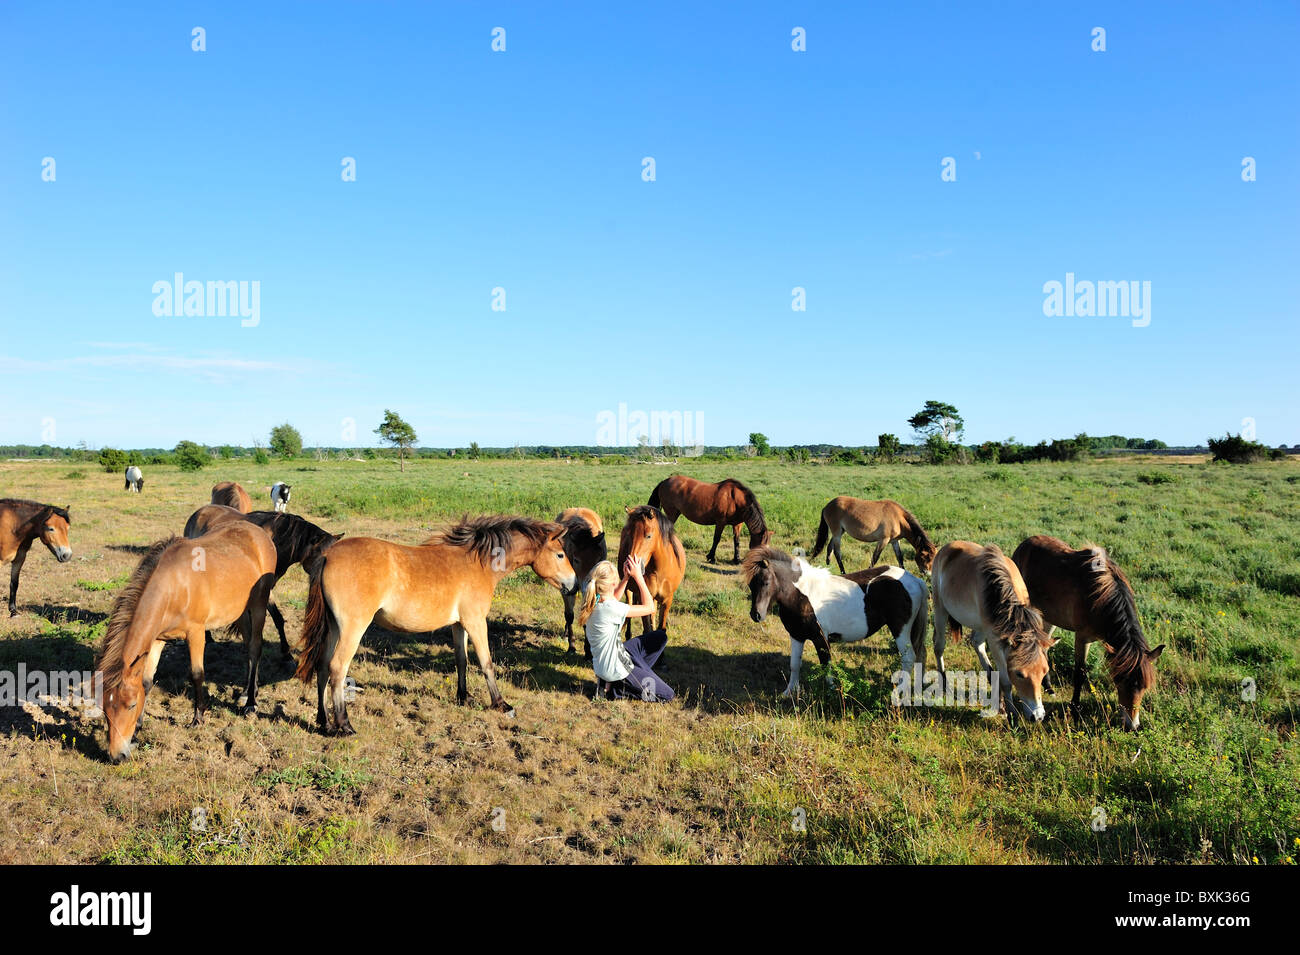 Young girl playing with some horses in a field. Stock Photo